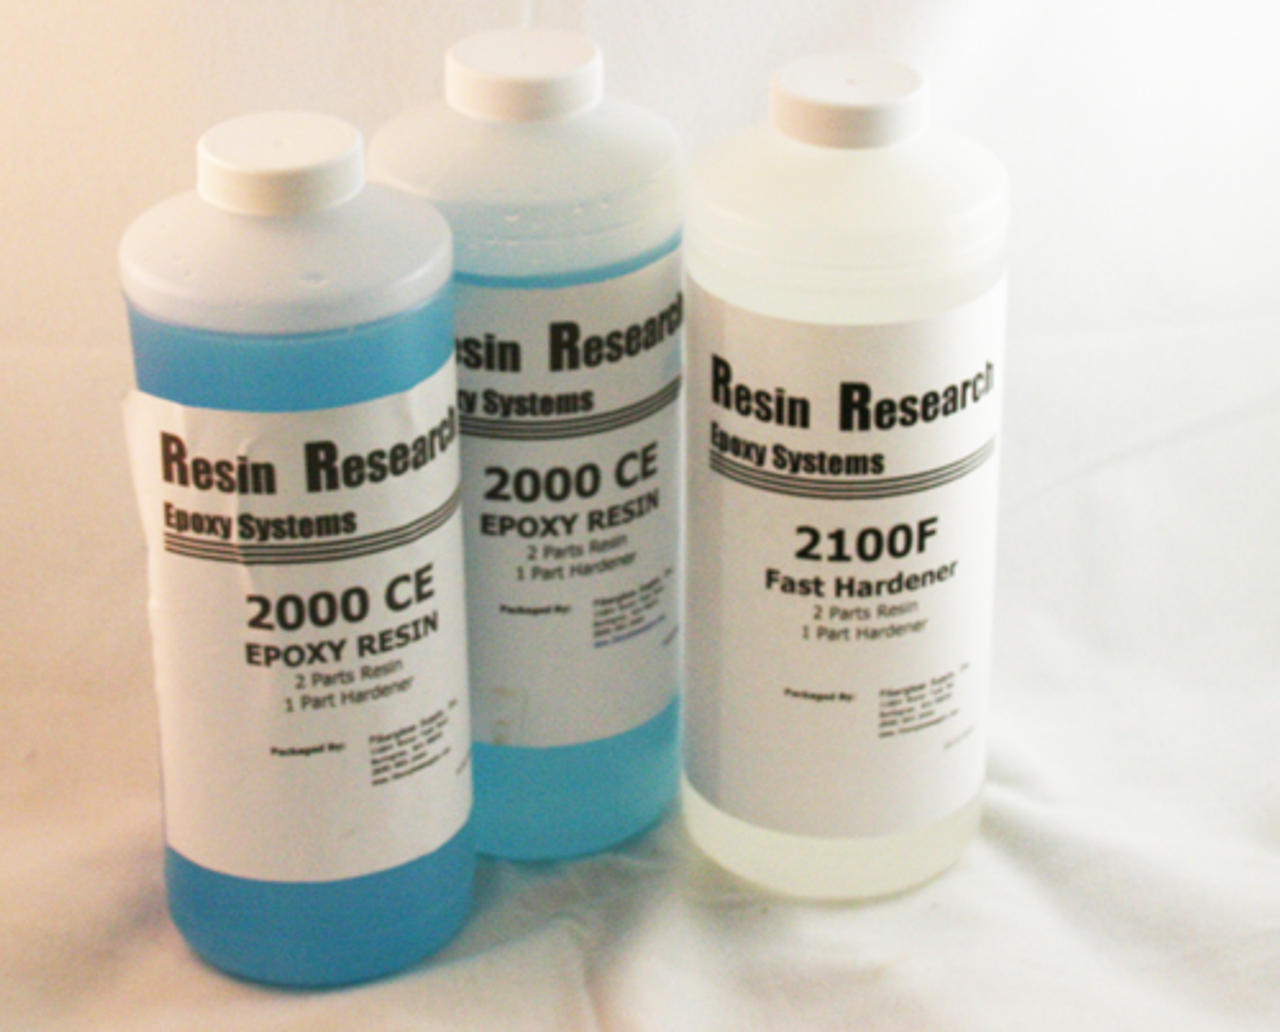 Resin Research 1.5 Gallon Kit 2000CE Epoxy with Fast Hardener